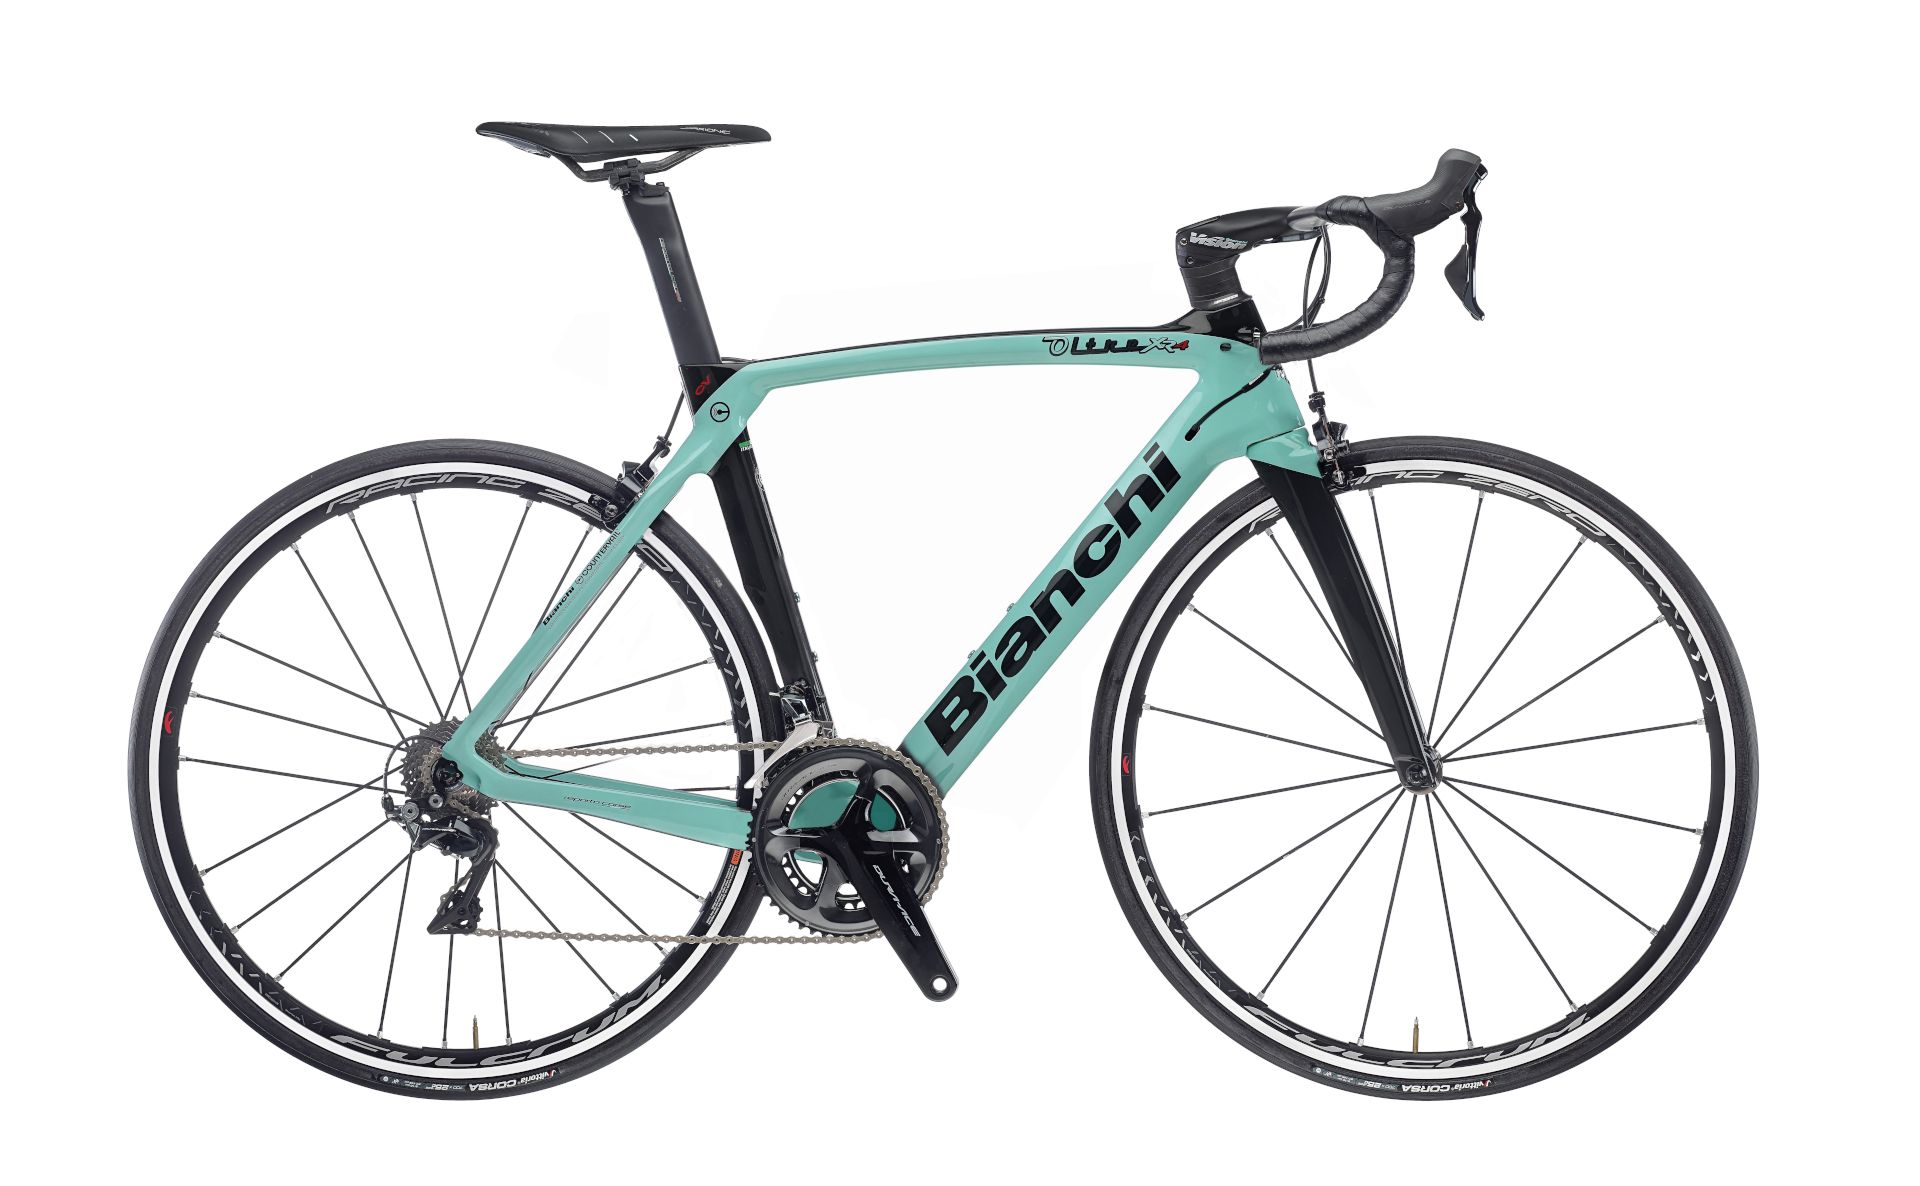 Oltre XR4 - full Dura Ace 11sp Compact